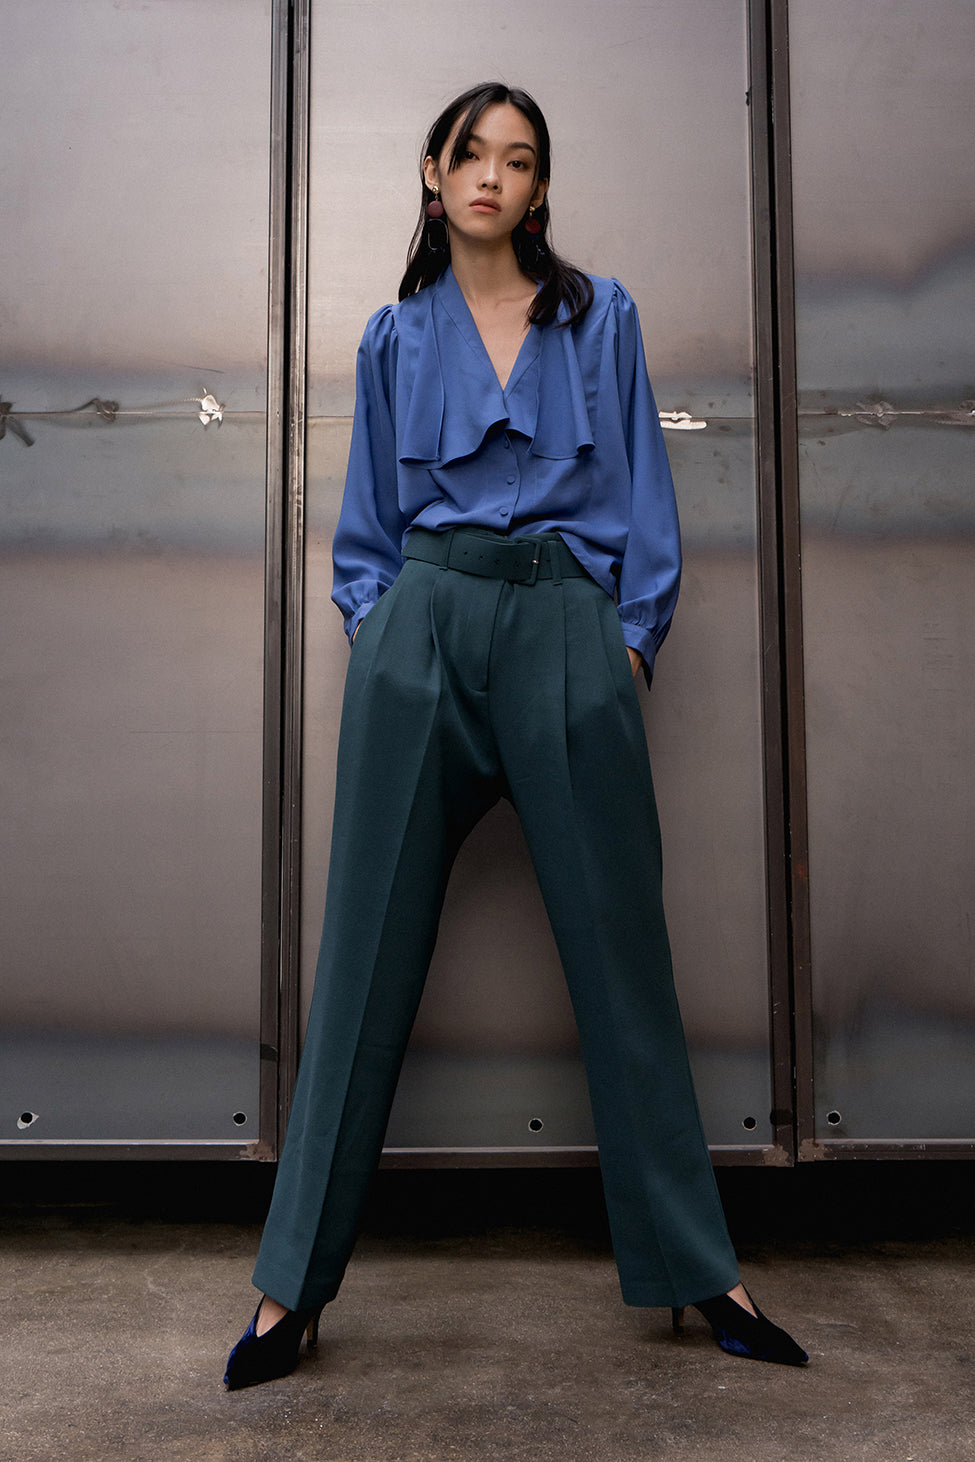 The Lizzie Top featuring wide V-neckline, long sleeve with button cuffs, asymmetrical ruffle detailing. Full-button placket. Slightly cropped length. High-low.